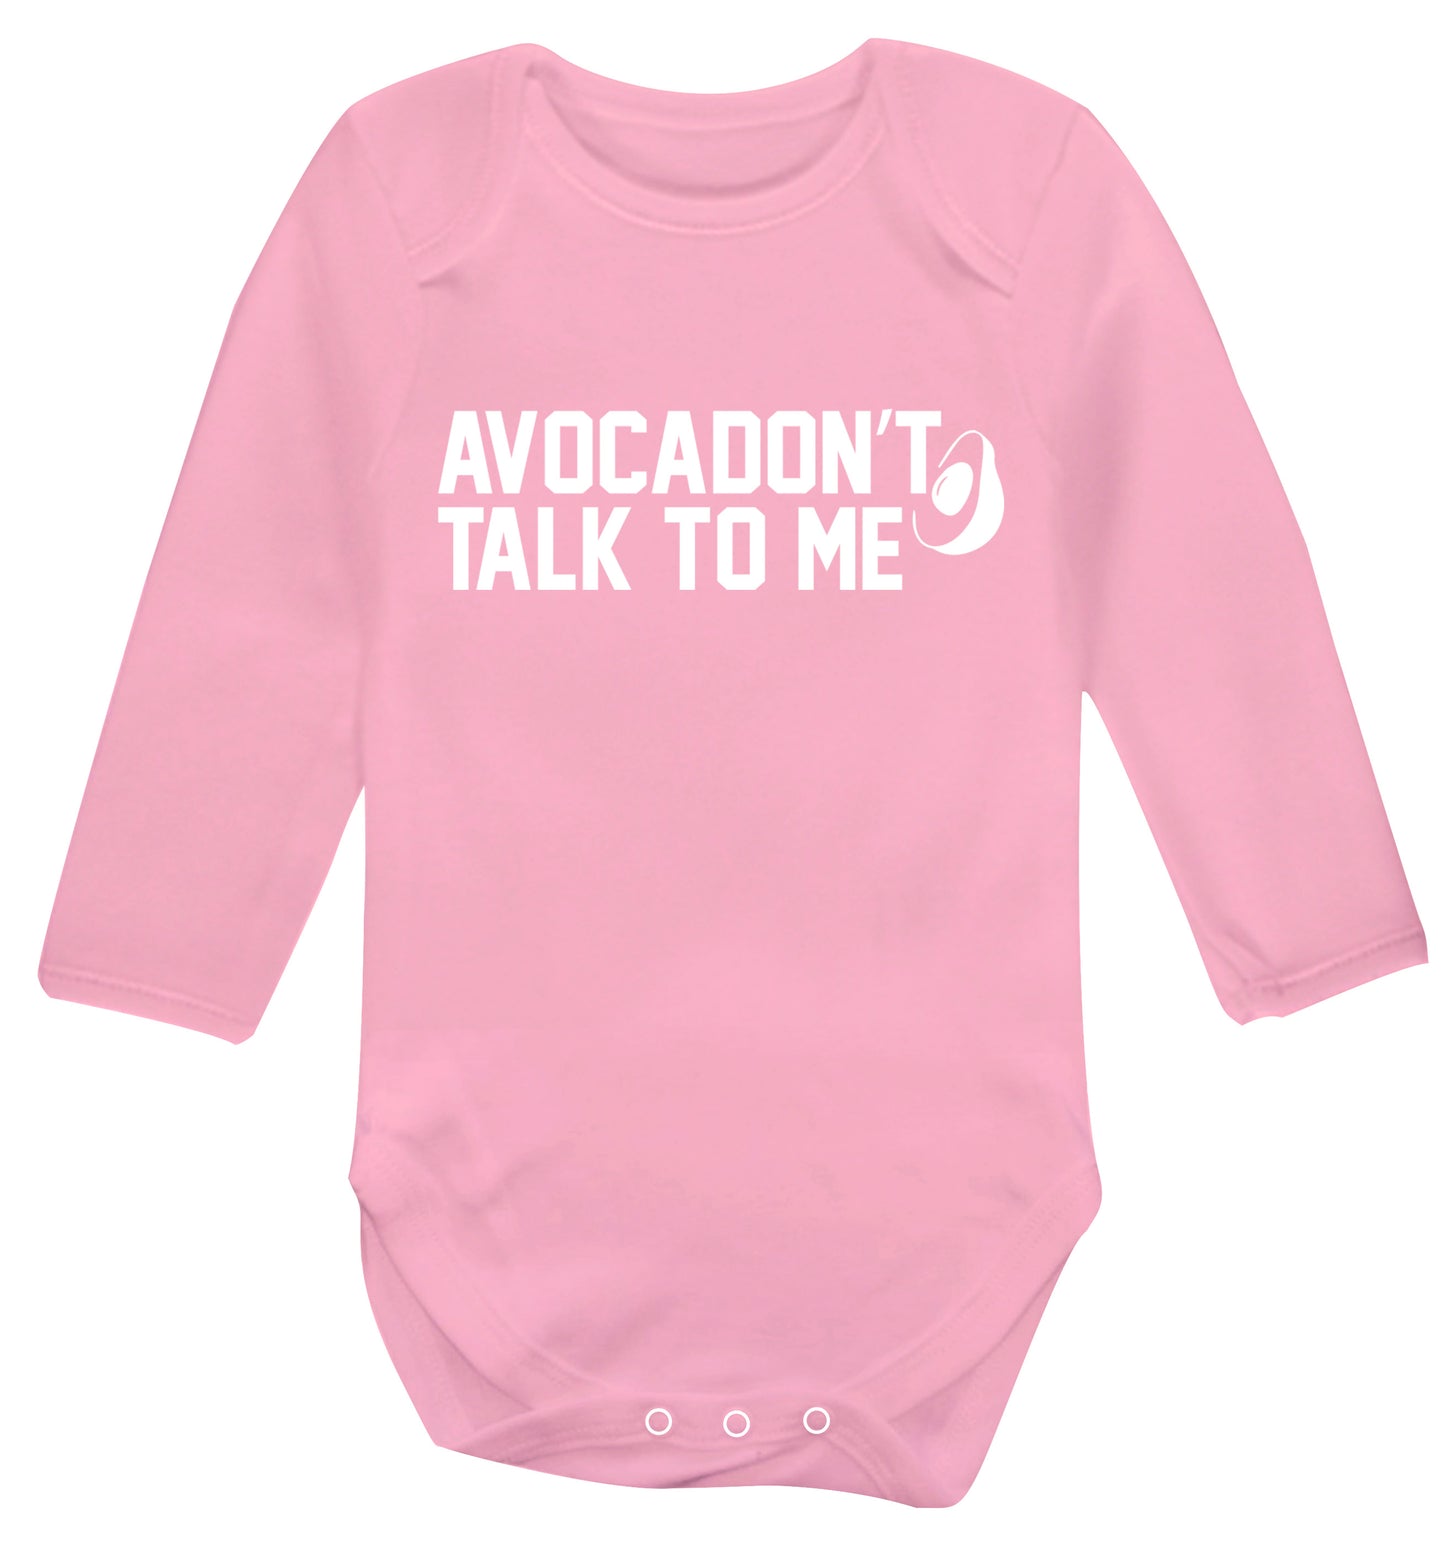 Avocadon't talk to me Baby Vest long sleeved pale pink 6-12 months